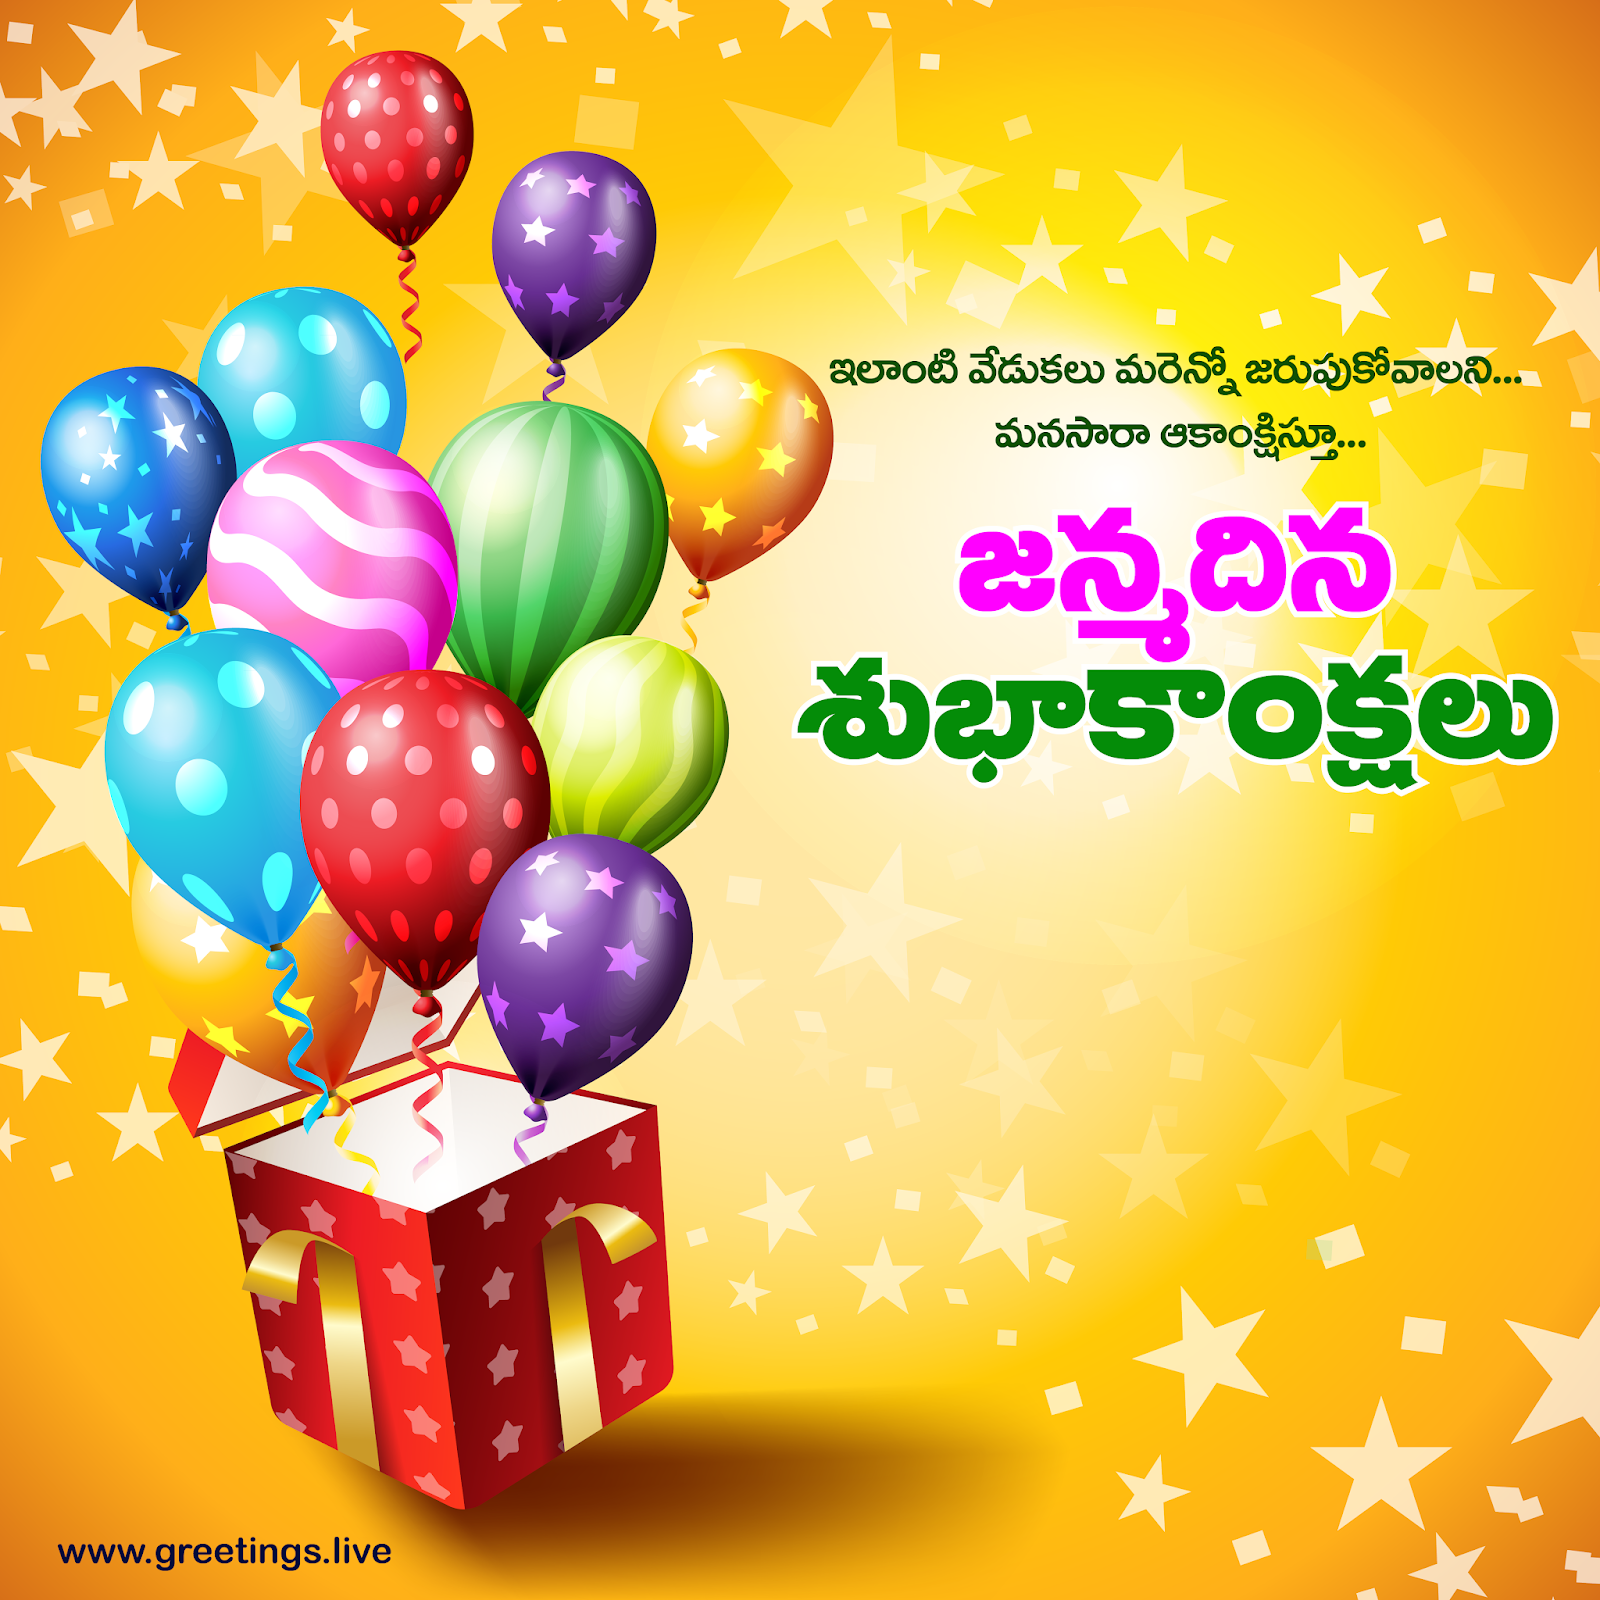 Greetings Live Free Daily Greetings Pictures Festival Gif Images Best Telugu Birthday Wishes Happy Birthday Telugu Images Hd